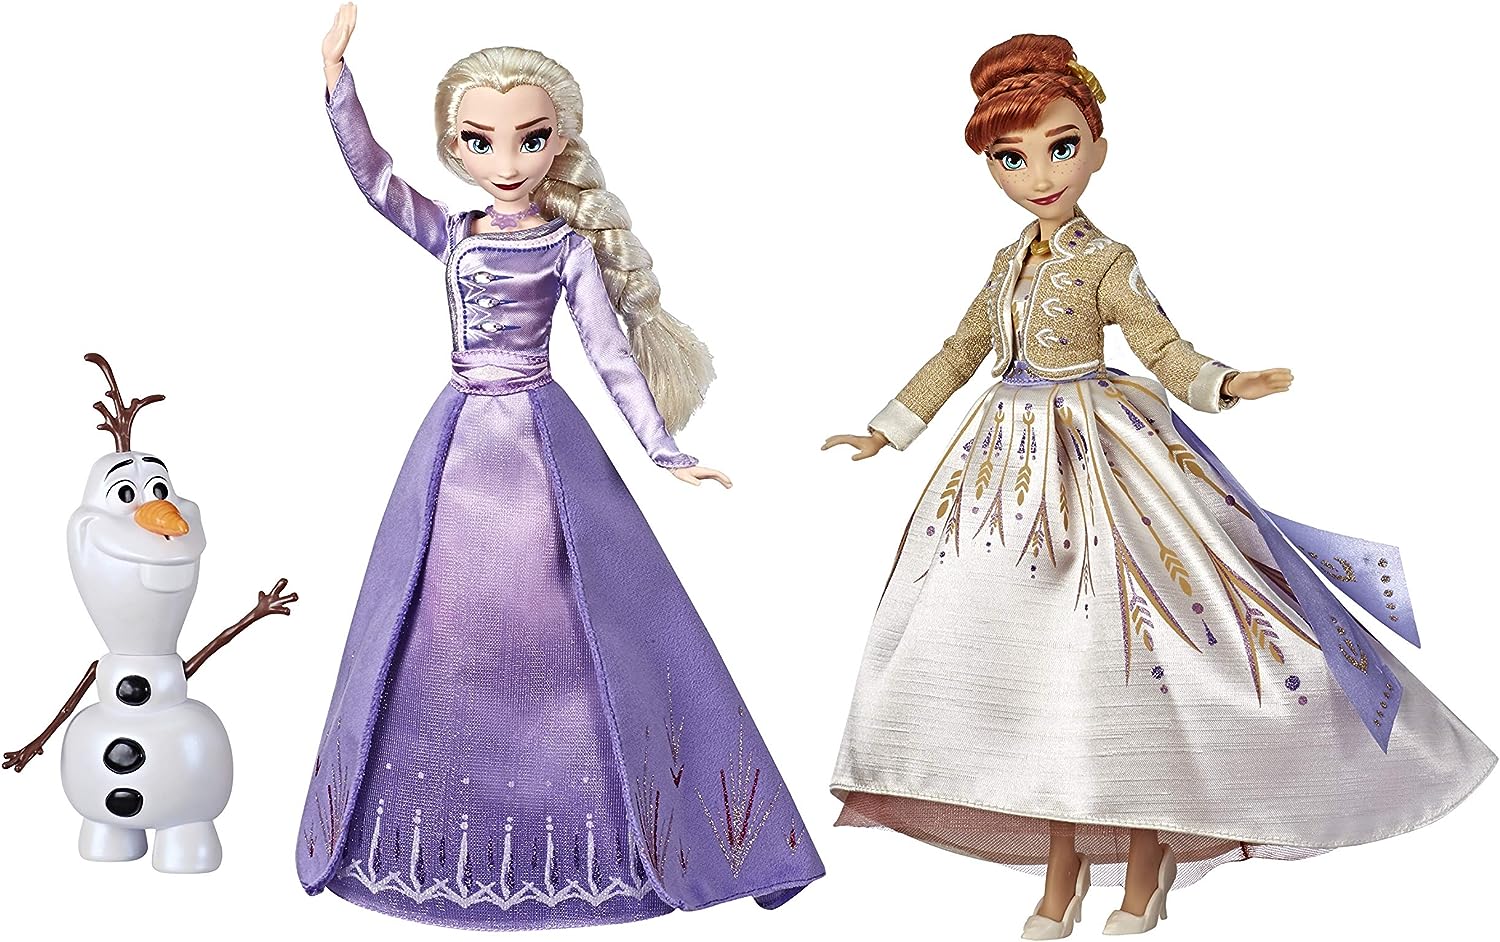 Disney Frozen Elsa, Anna and Olaf Fashion Doll Set With Dresses and Shoes Inspired by Disney’s Frozen 2 – Toy For Children Aged 3 and Up